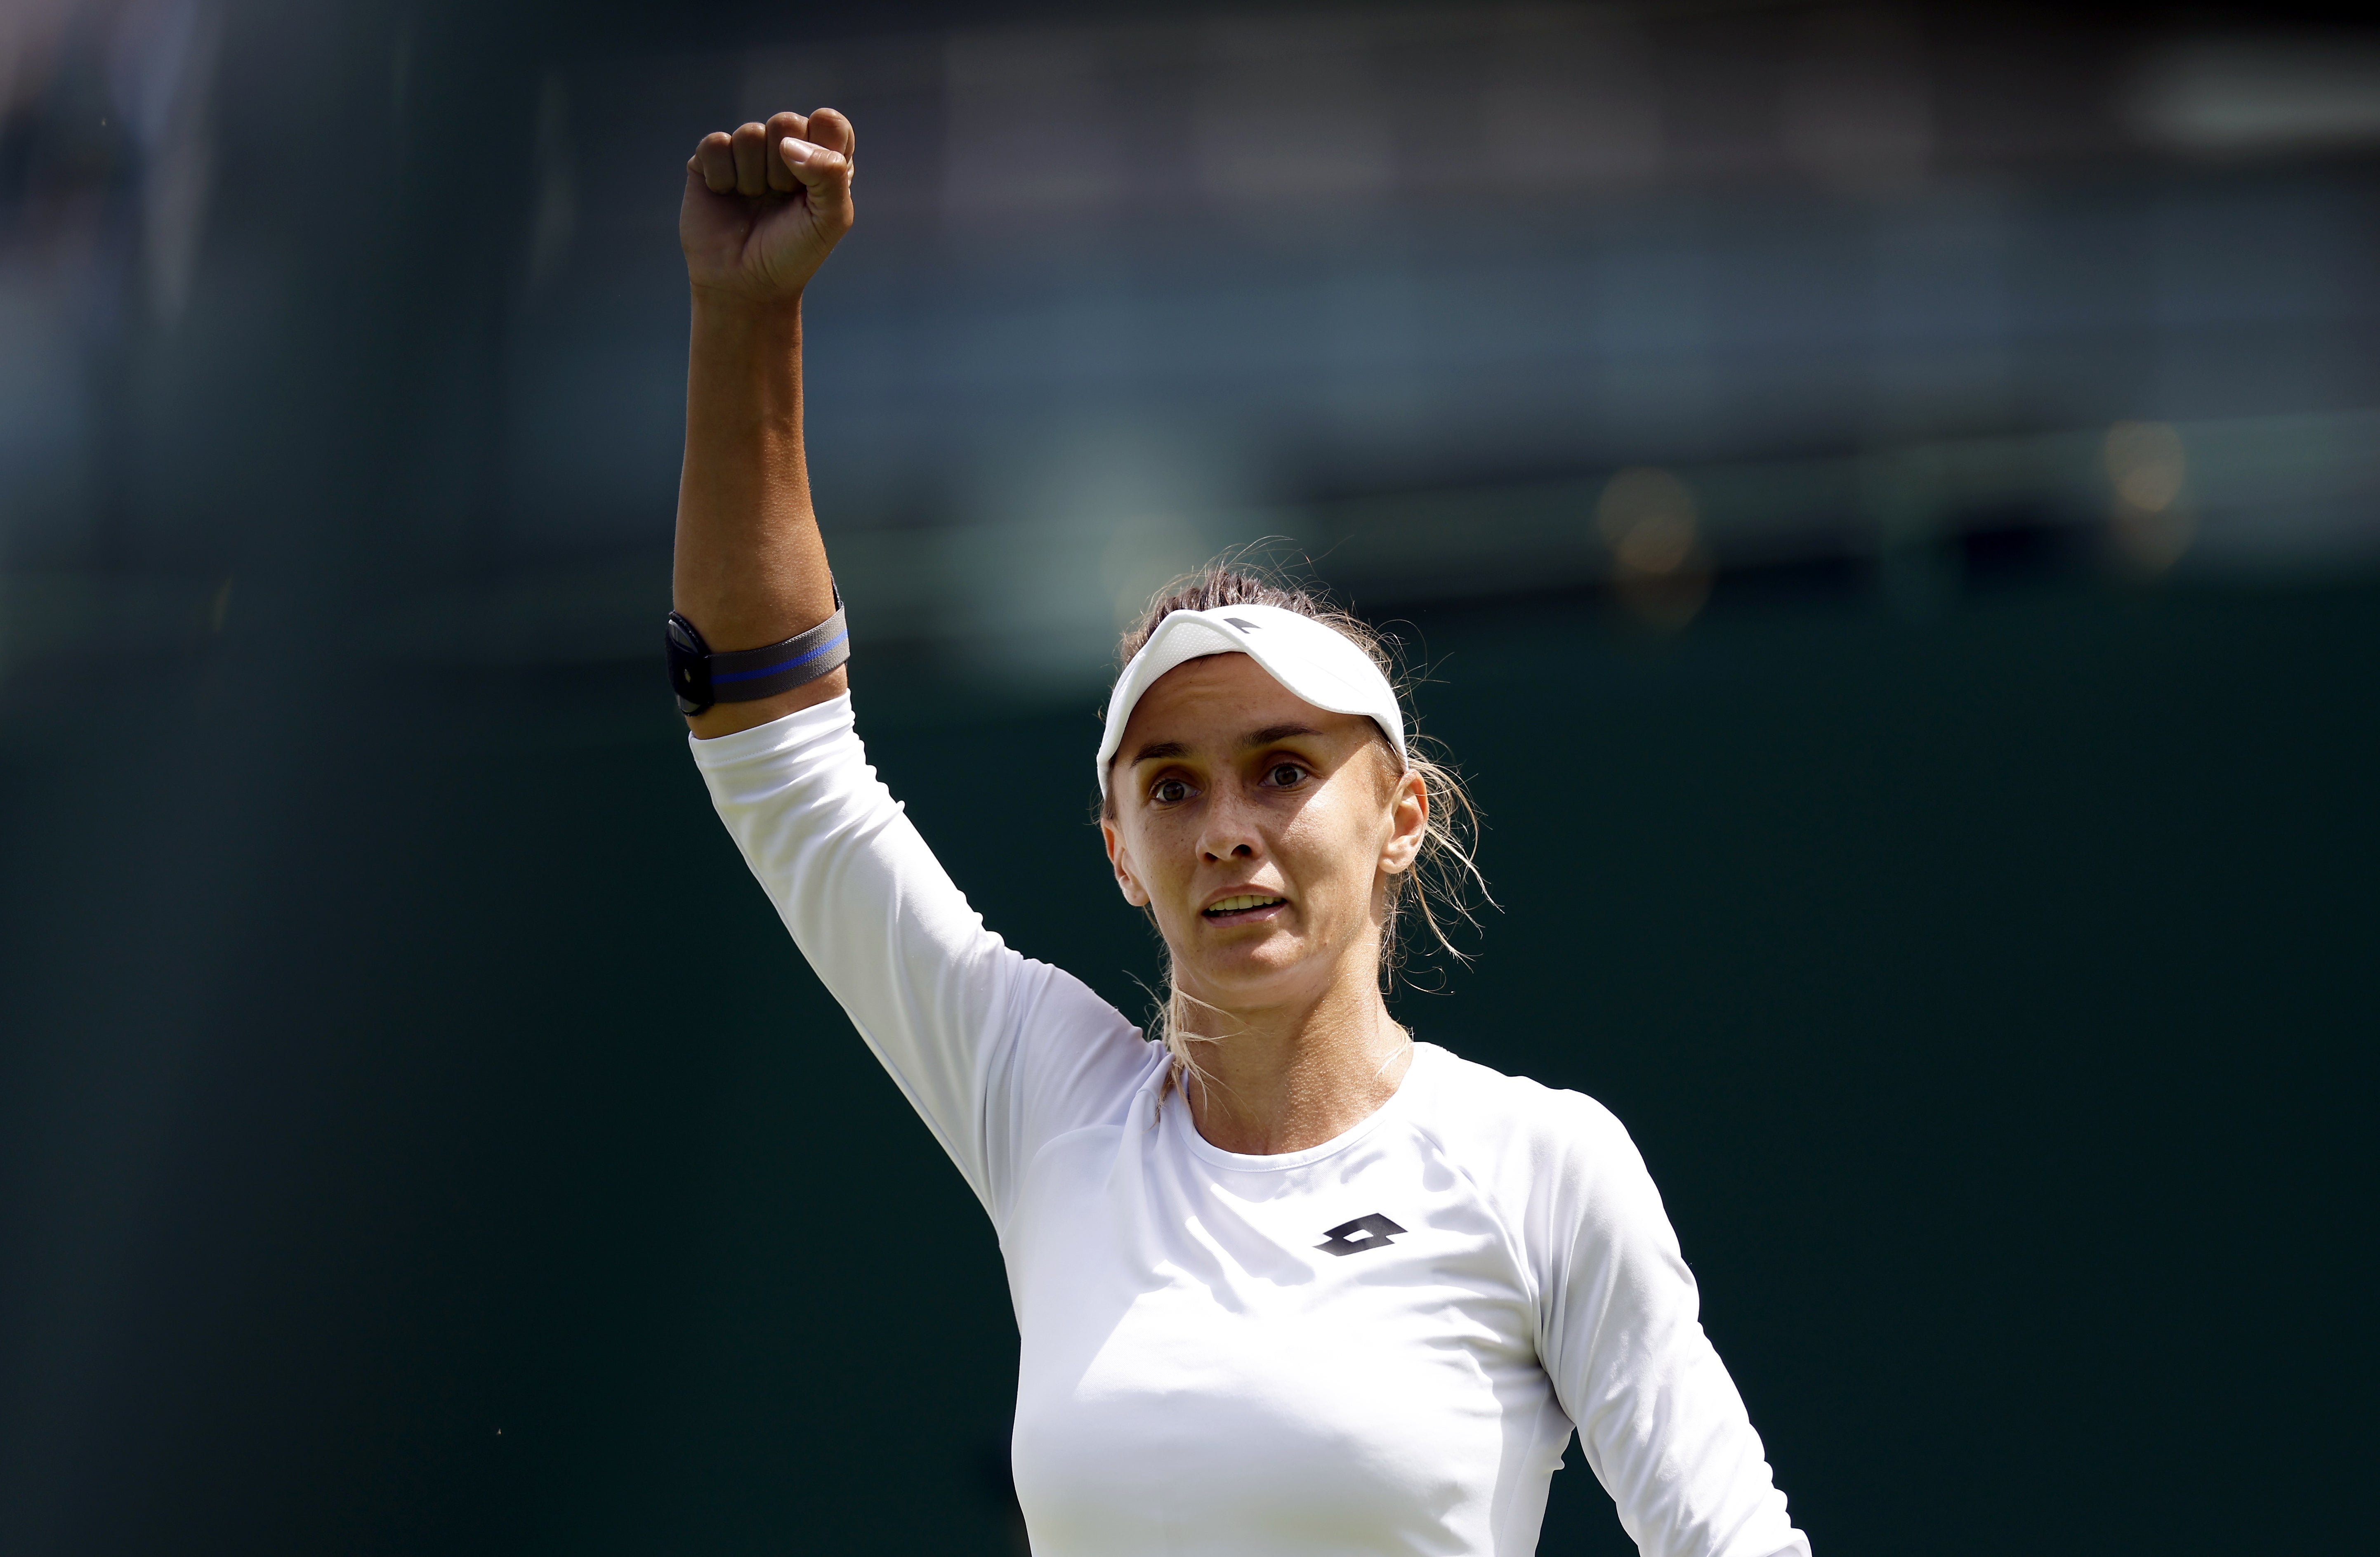 Tsurenko booked her place in the second round at Wimbledon (Steven Paston/PA)